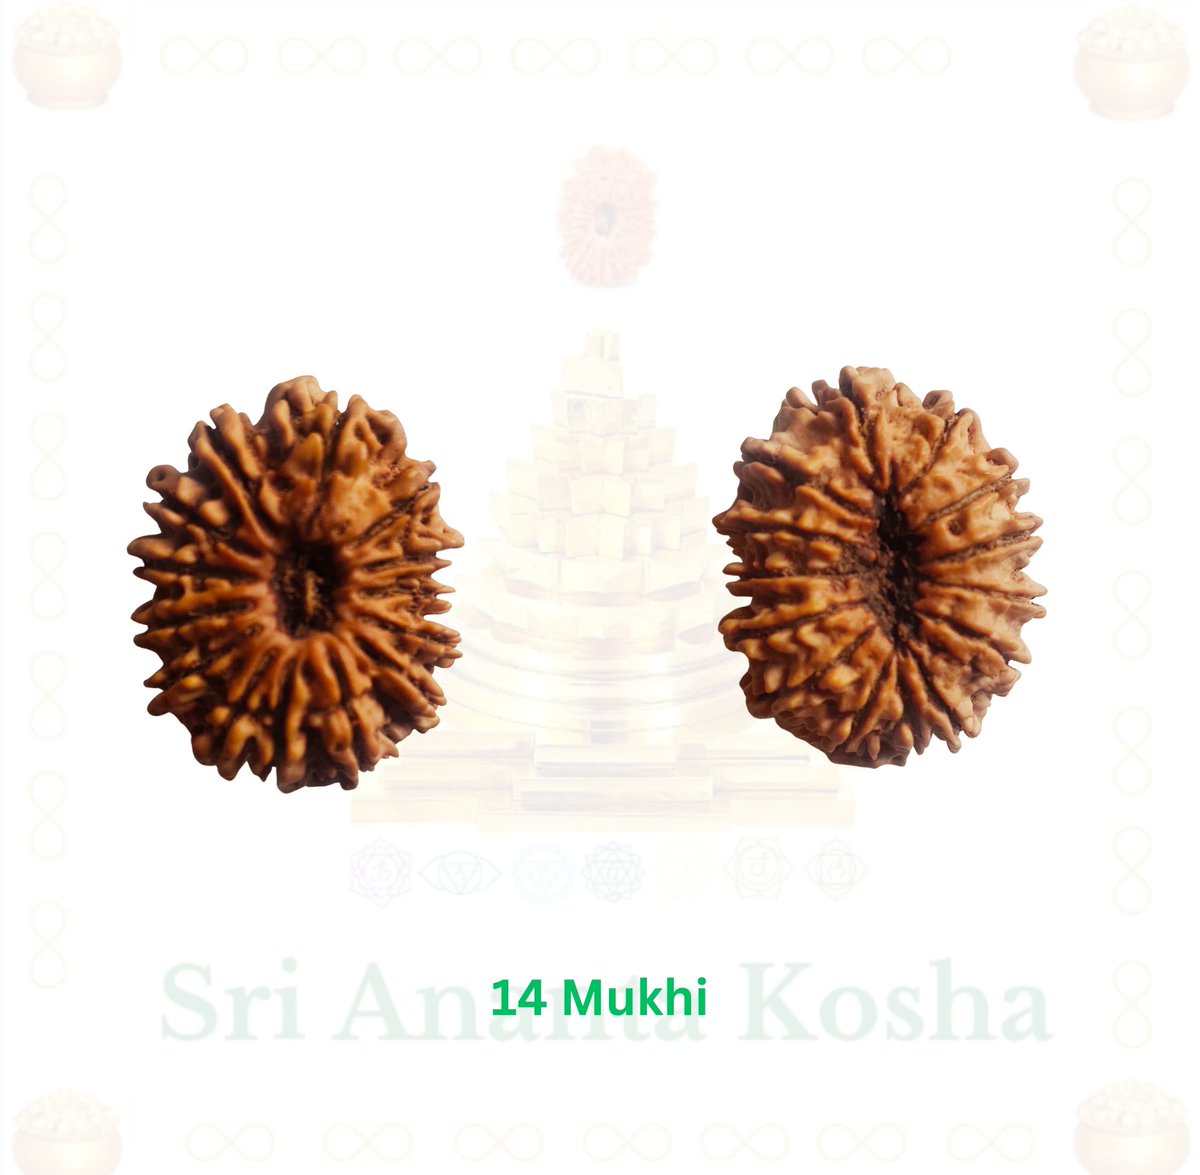 Jai ShivShakti 🙏

14 Mukhi Rudraksha :-

If one wants to change life positively from adverse situations then 14 Mukhi Rudraksha is solution.

It heals phobias, fears, traumas, and troubling memories.

People who are in decision-making posts in any organization can take blessings…